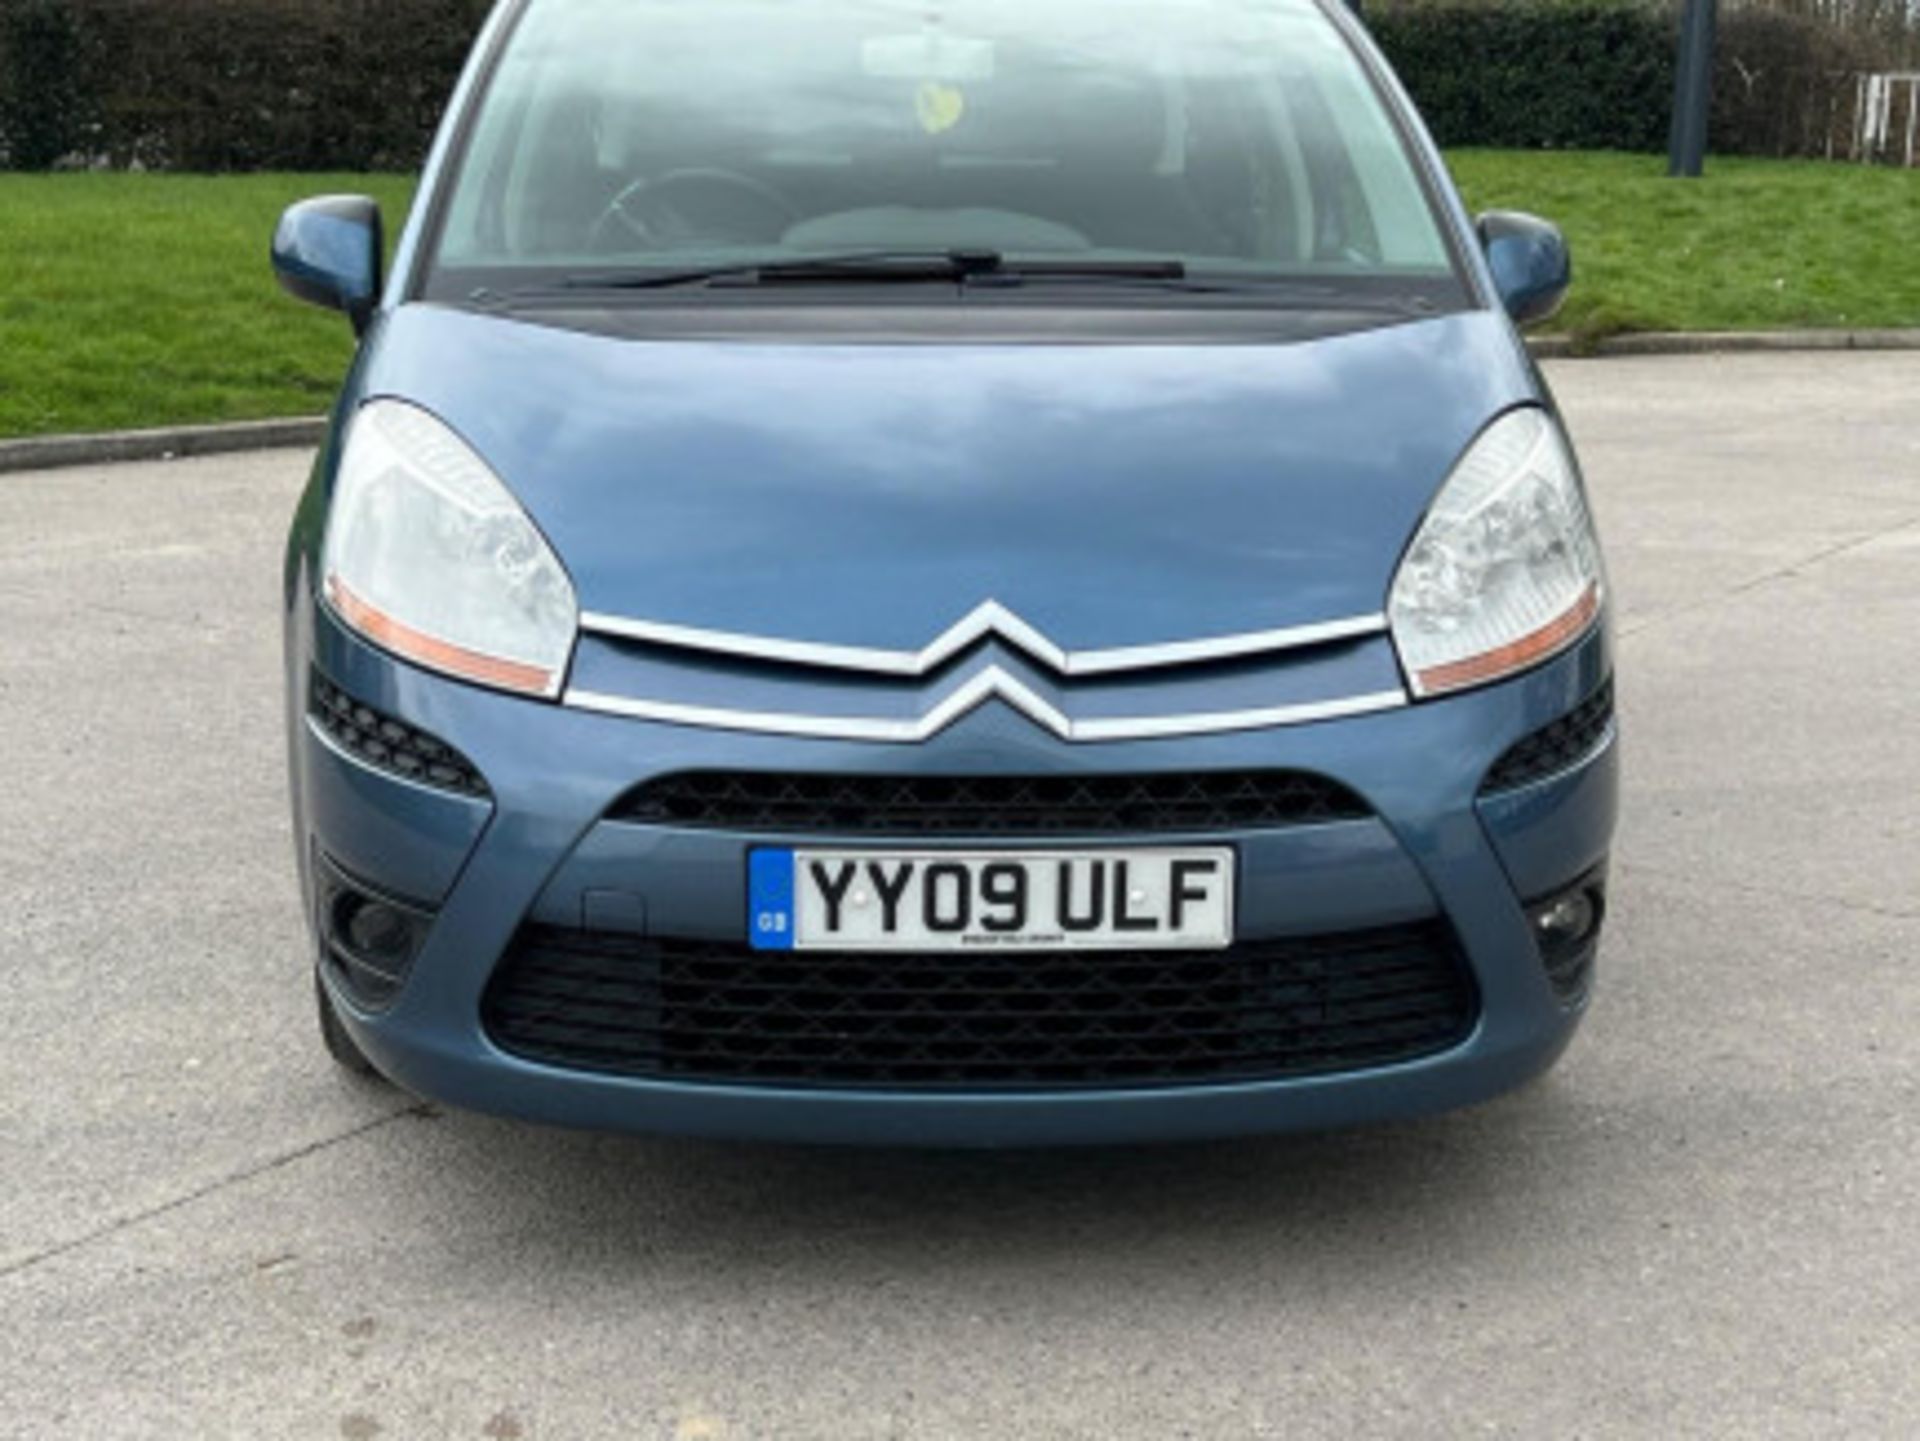 2009 CITROEN C4 PICASSO 1.6 HDI VTR+ EGS6 5DR >>--NO VAT ON HAMMER--<< - Image 44 of 123